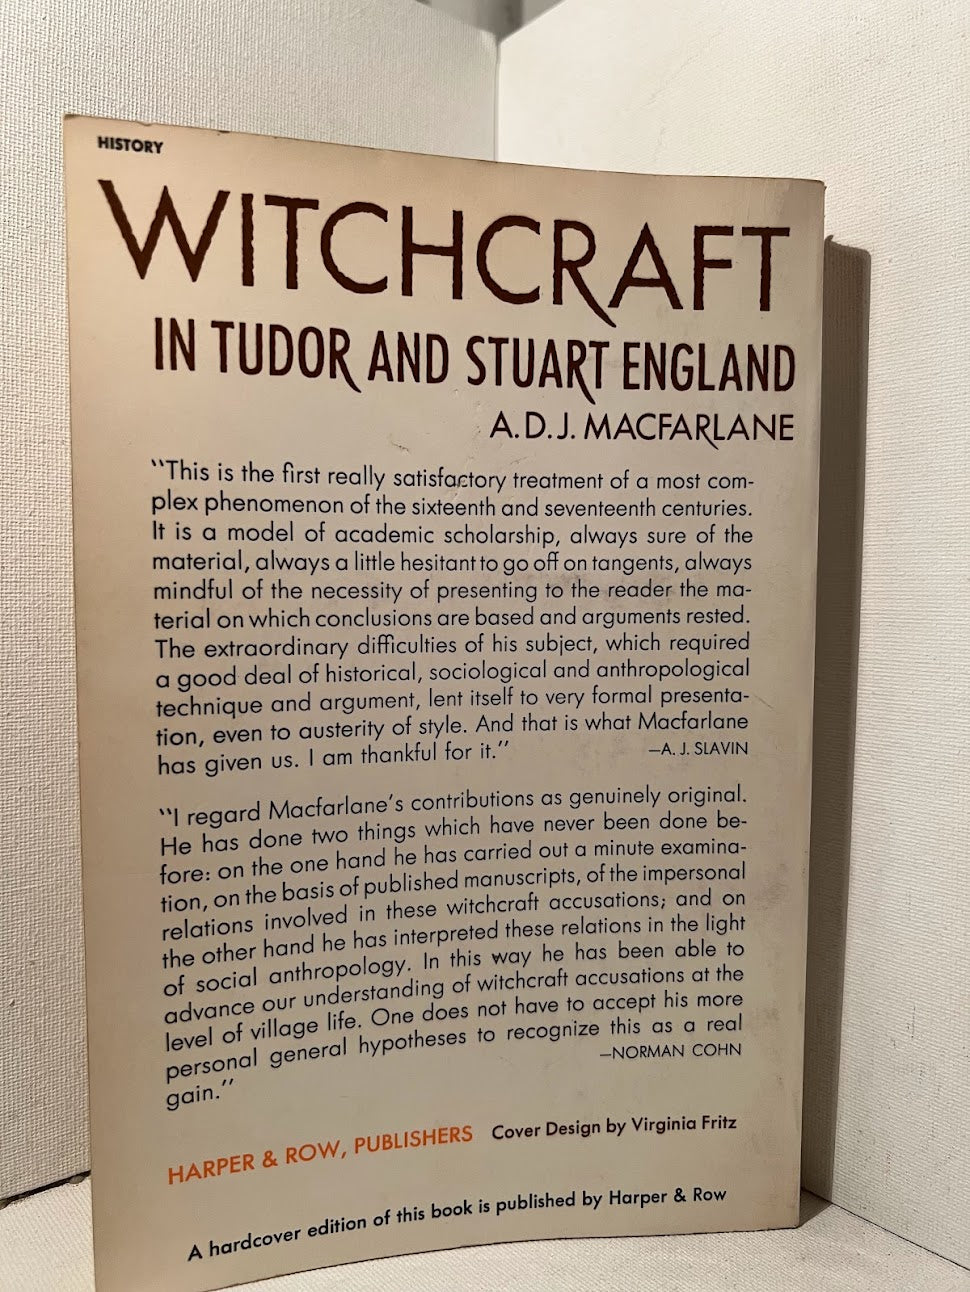 Witchcraft in Tudor and Stuart England by A.D.J. Macfarlane